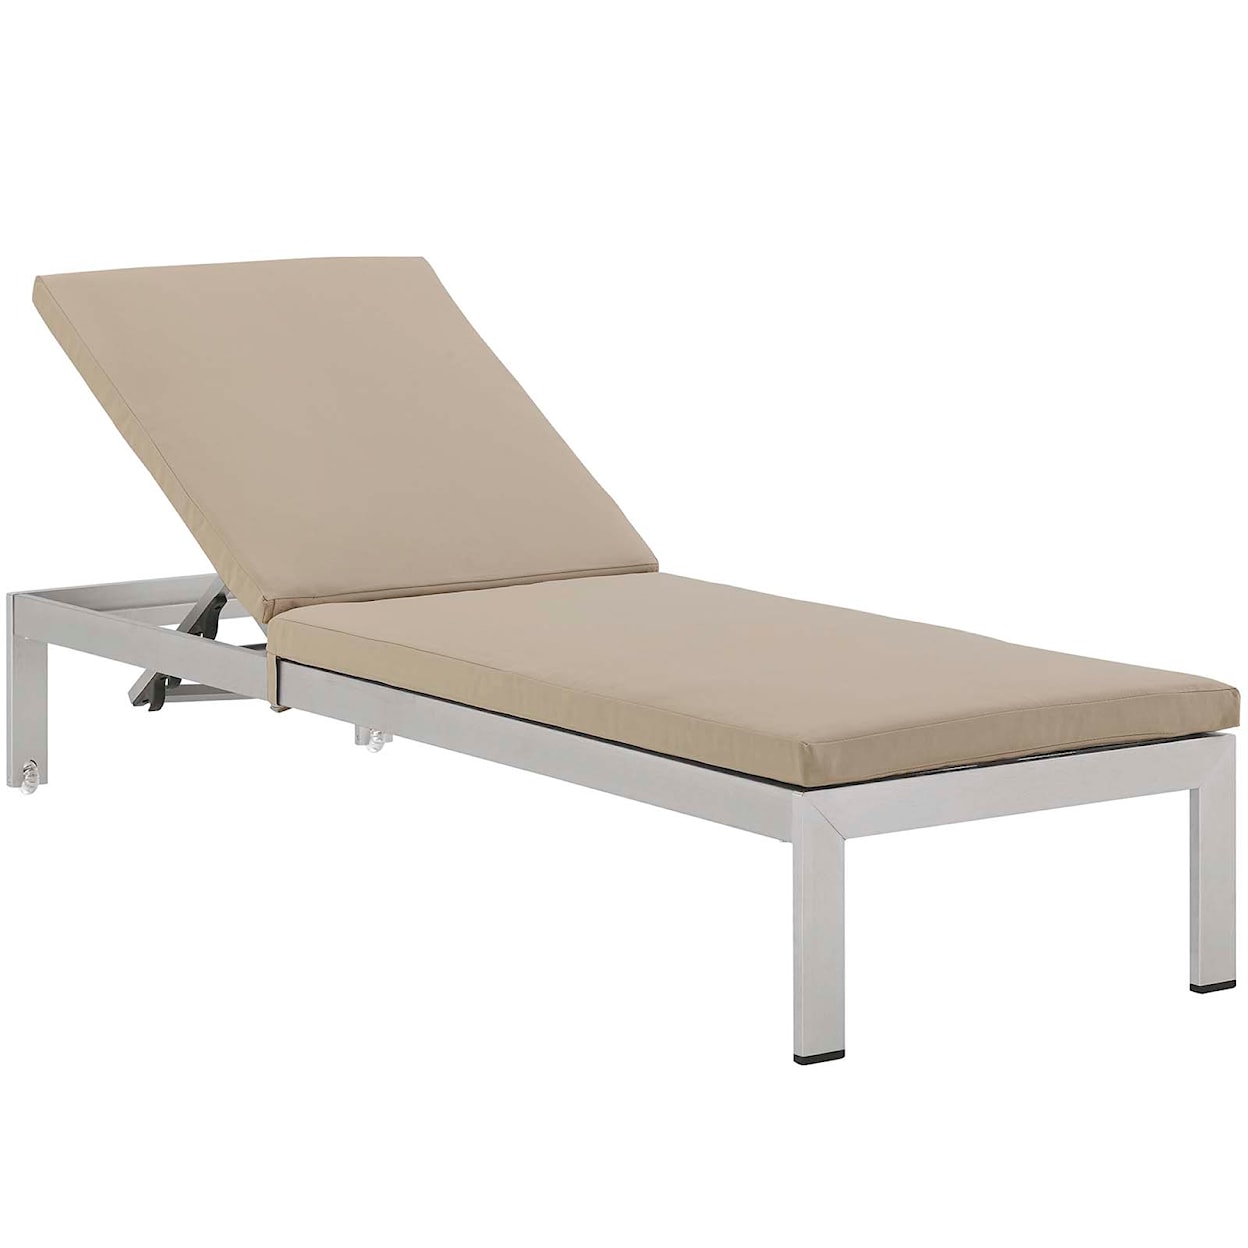 Modway Shore Outdoor Chaise